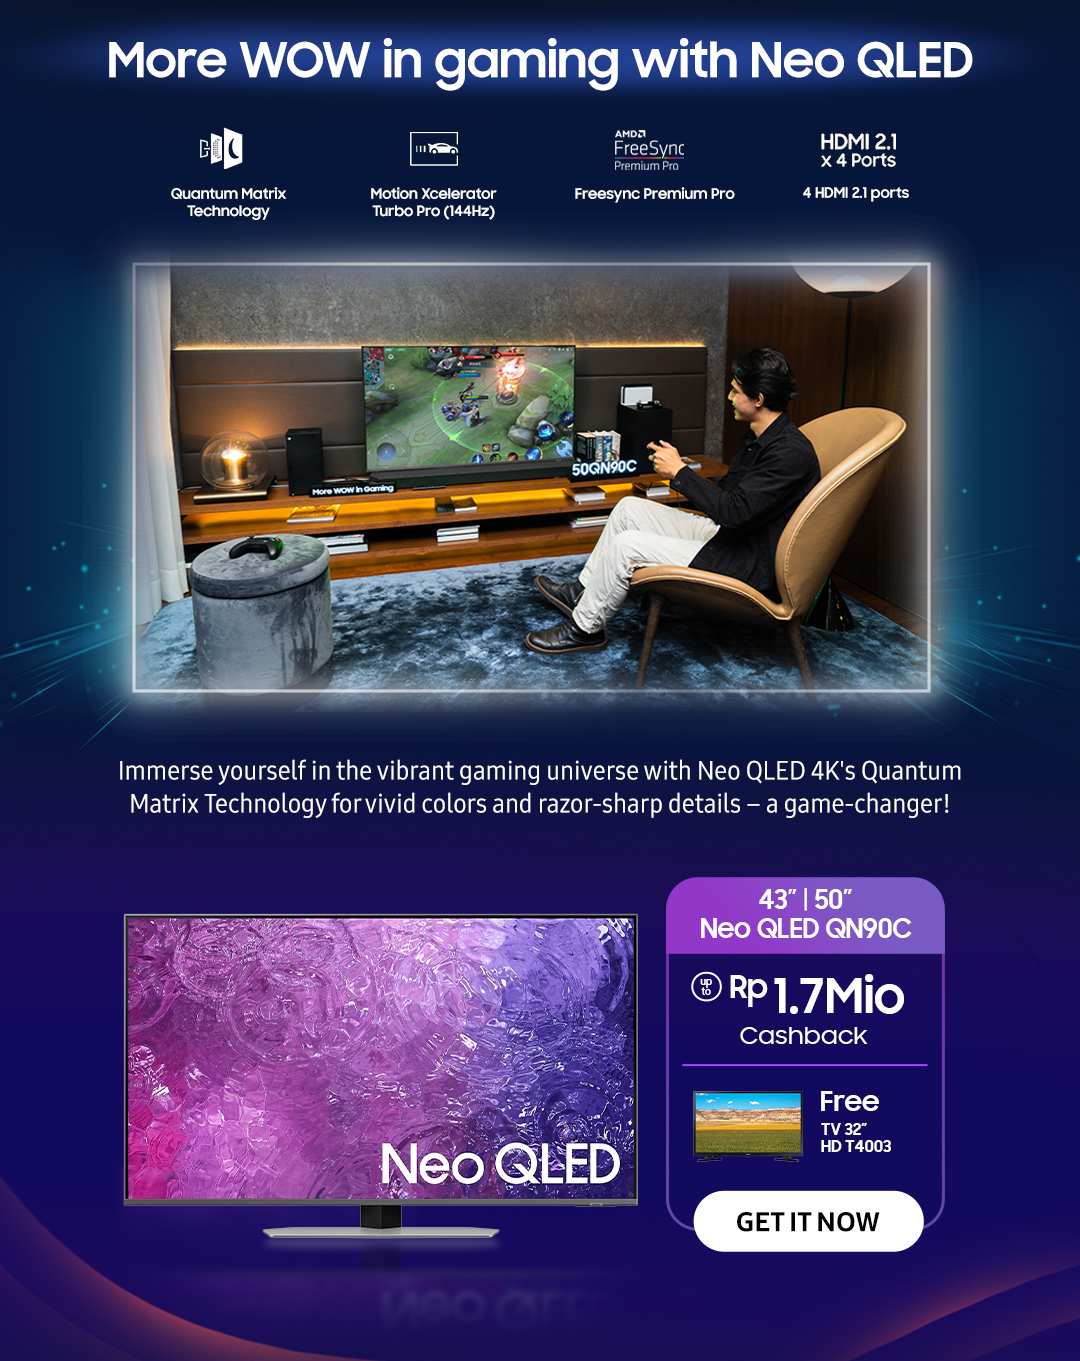 More WOW in gaming with Neo QLED | Immerse yourself in the vibrant gaming universe with Neo QLED 4K's Quantum Matrix Technology for vivid colors and razor-sharp details - a game-changer! Click here to get it now!